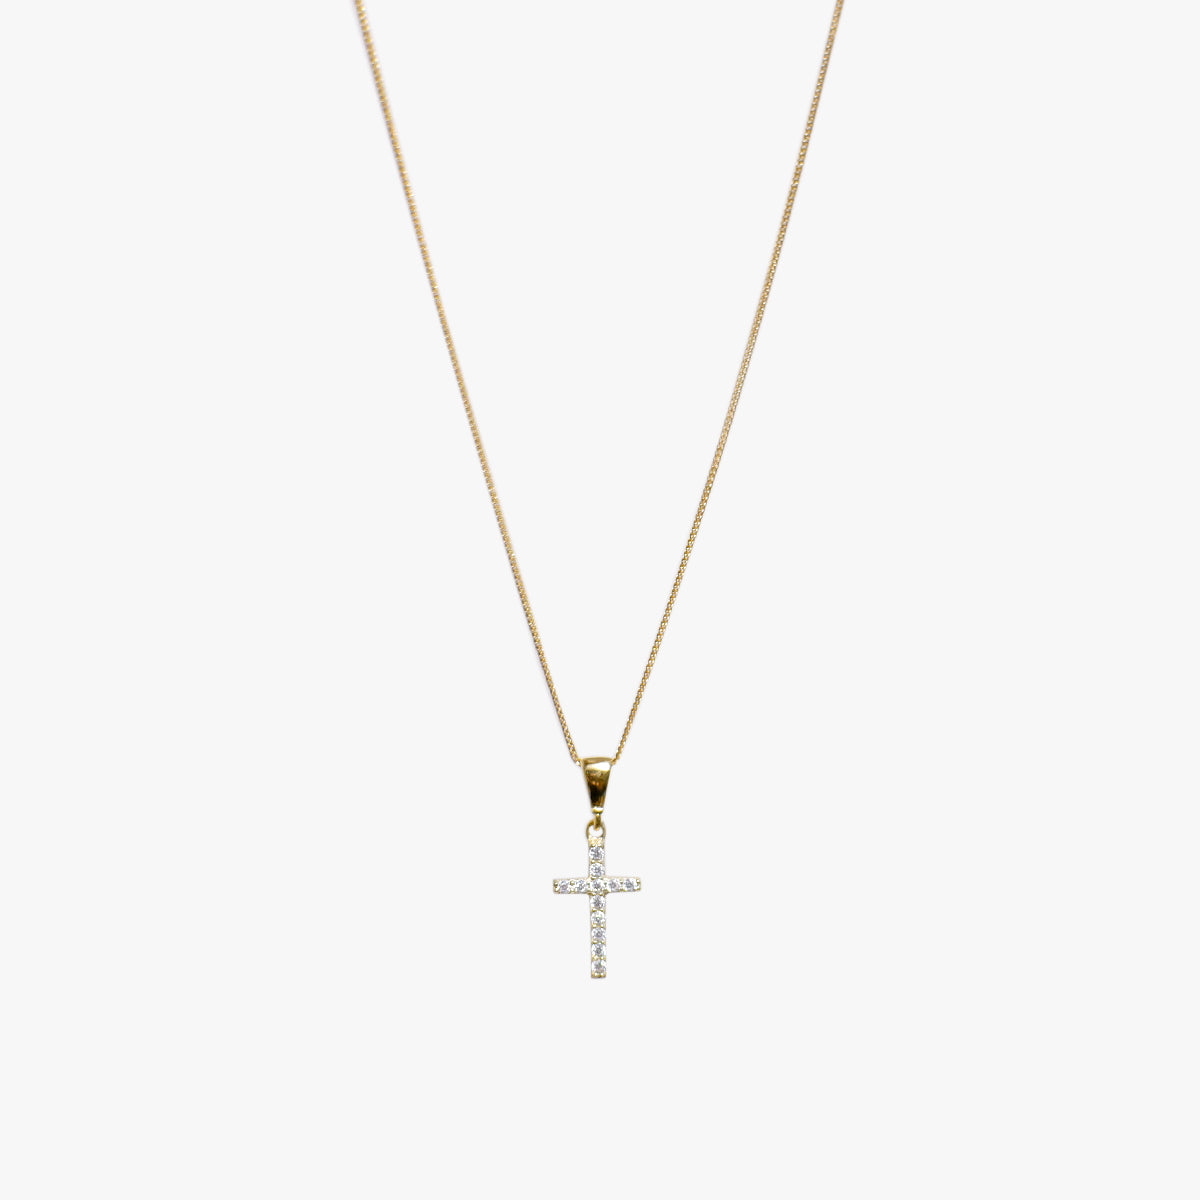 The Pavé Cross Necklace in Solid Gold